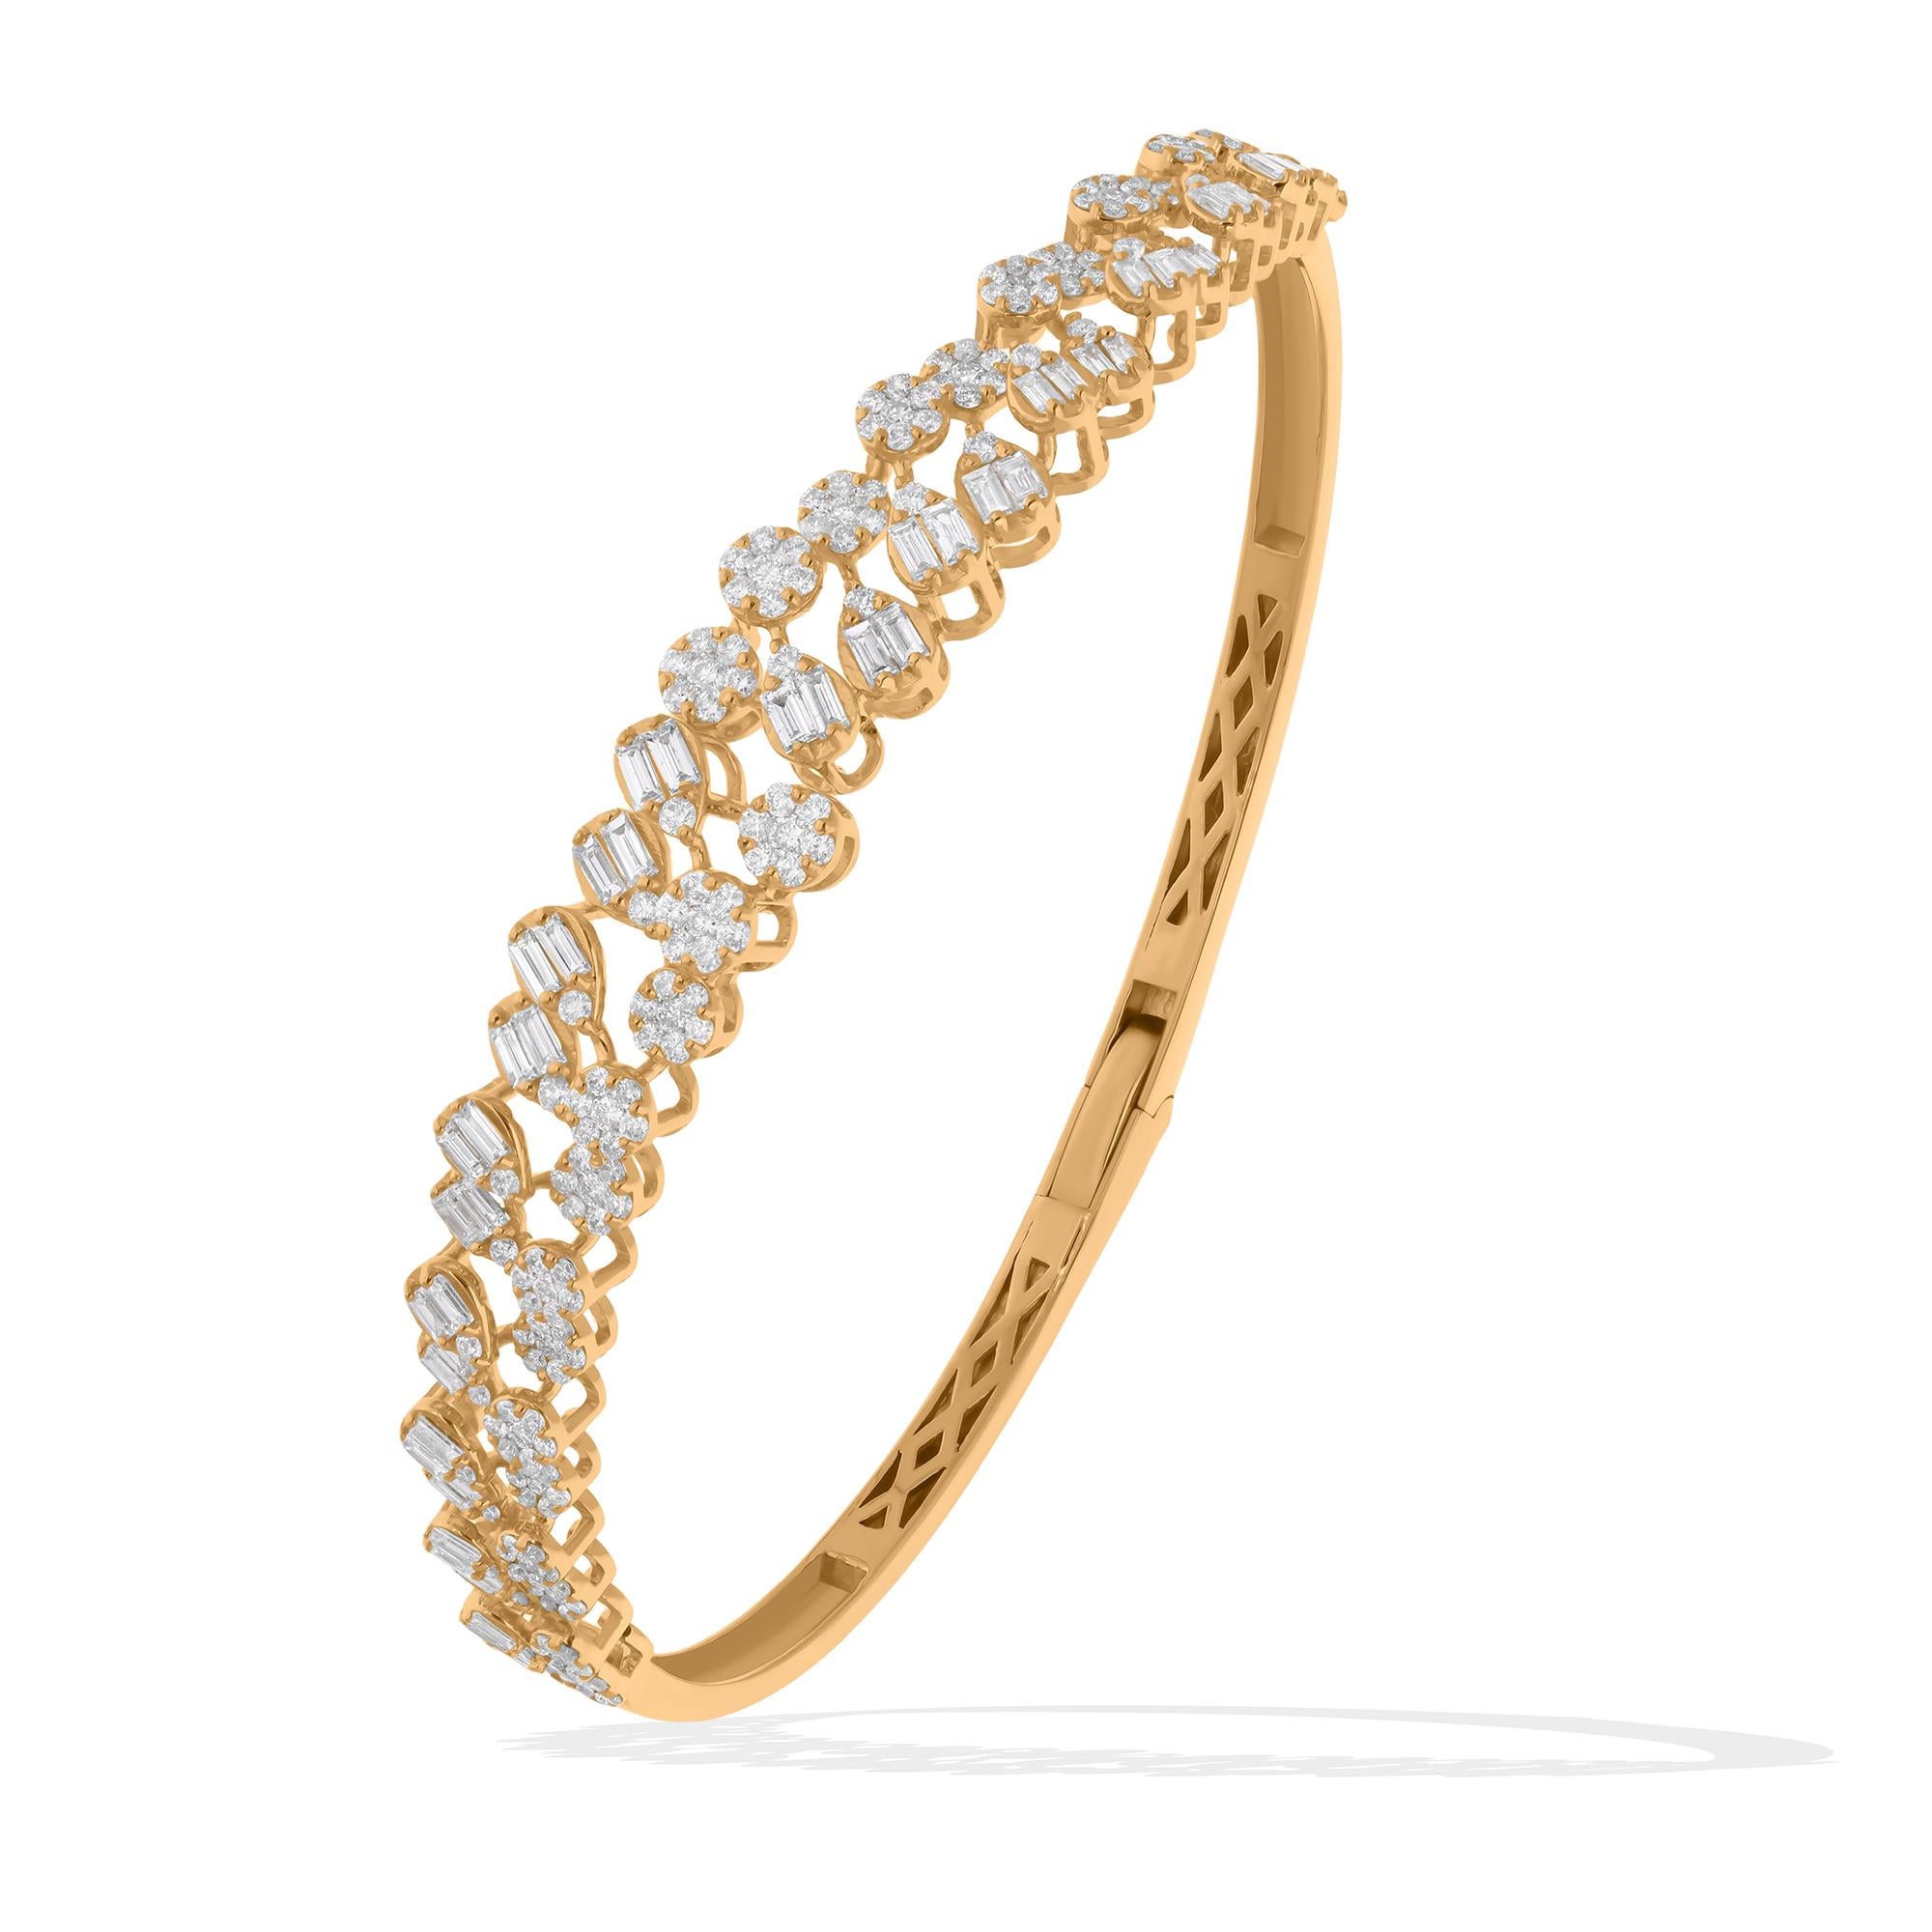 Each element of this bracelet is carefully considered, from the choice of materials to the arrangement of diamonds. The lustrous 18 Karat Yellow Gold provides a radiant backdrop for the dazzling array of diamonds, enhancing their brilliance and